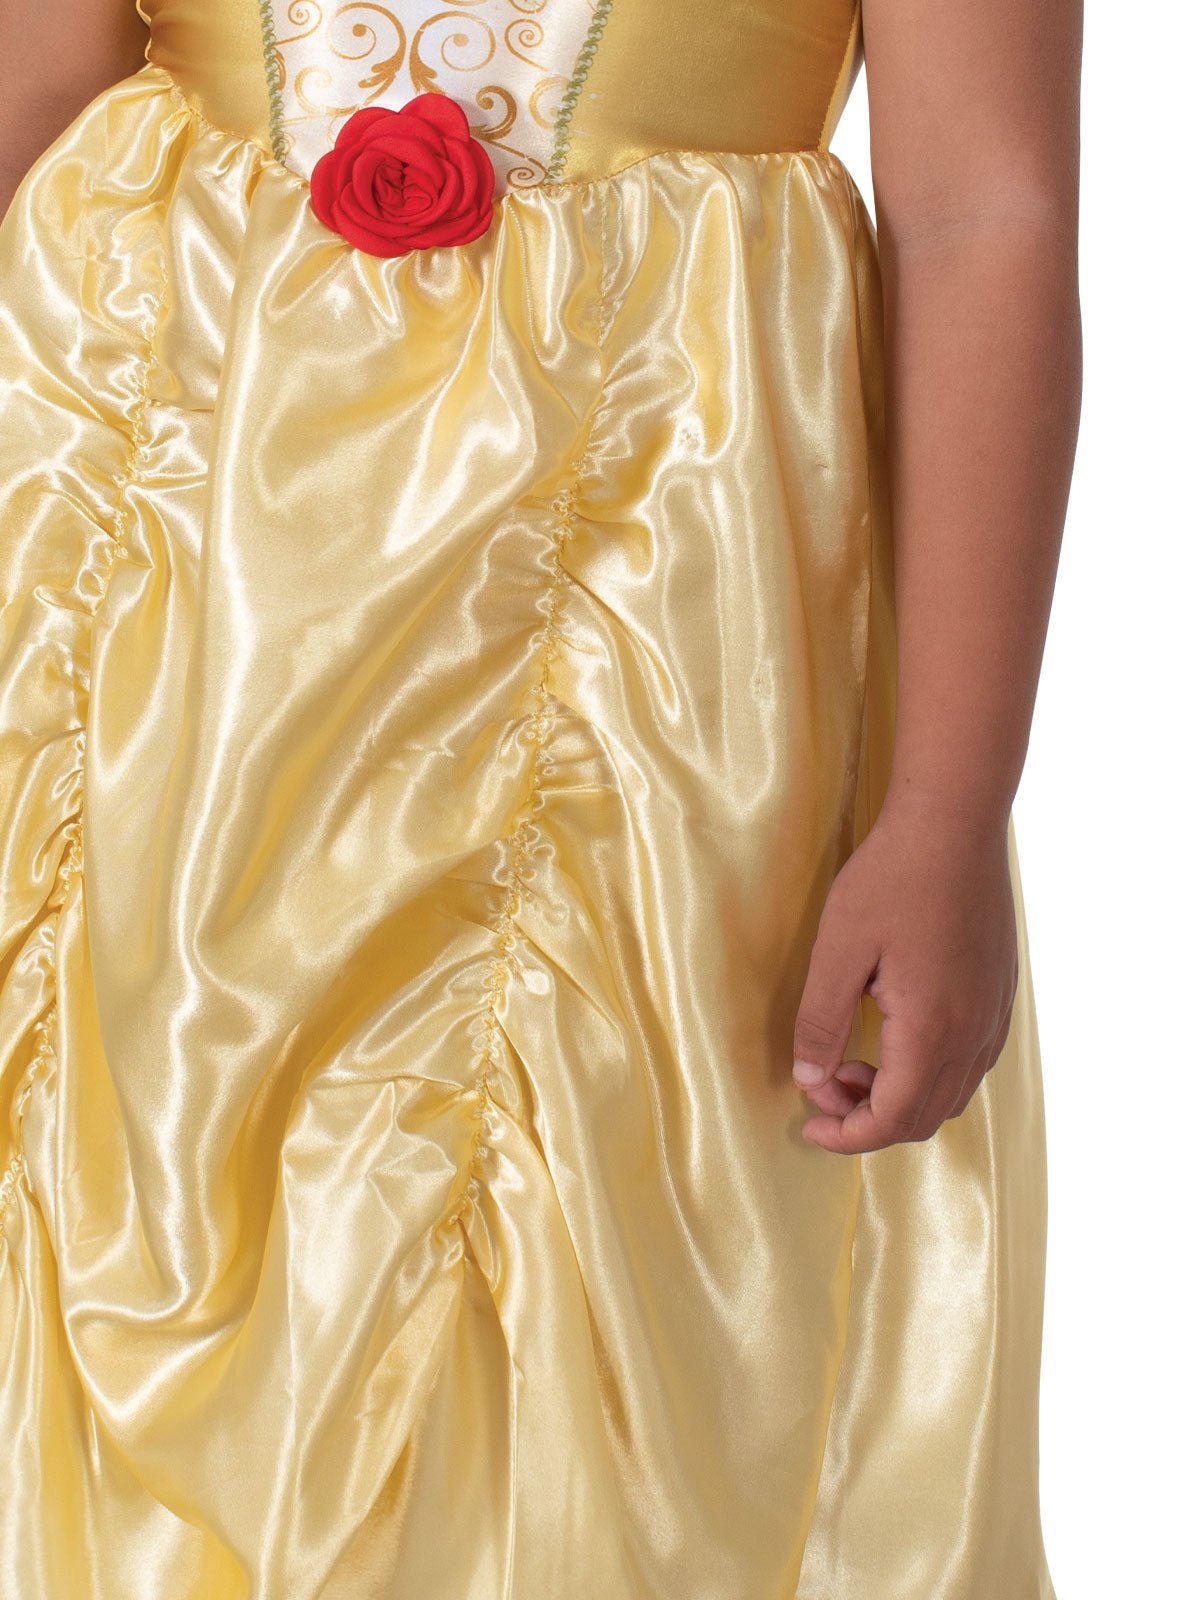 Kids Belle Costume with Tiara - Magical Beauty and the Beast